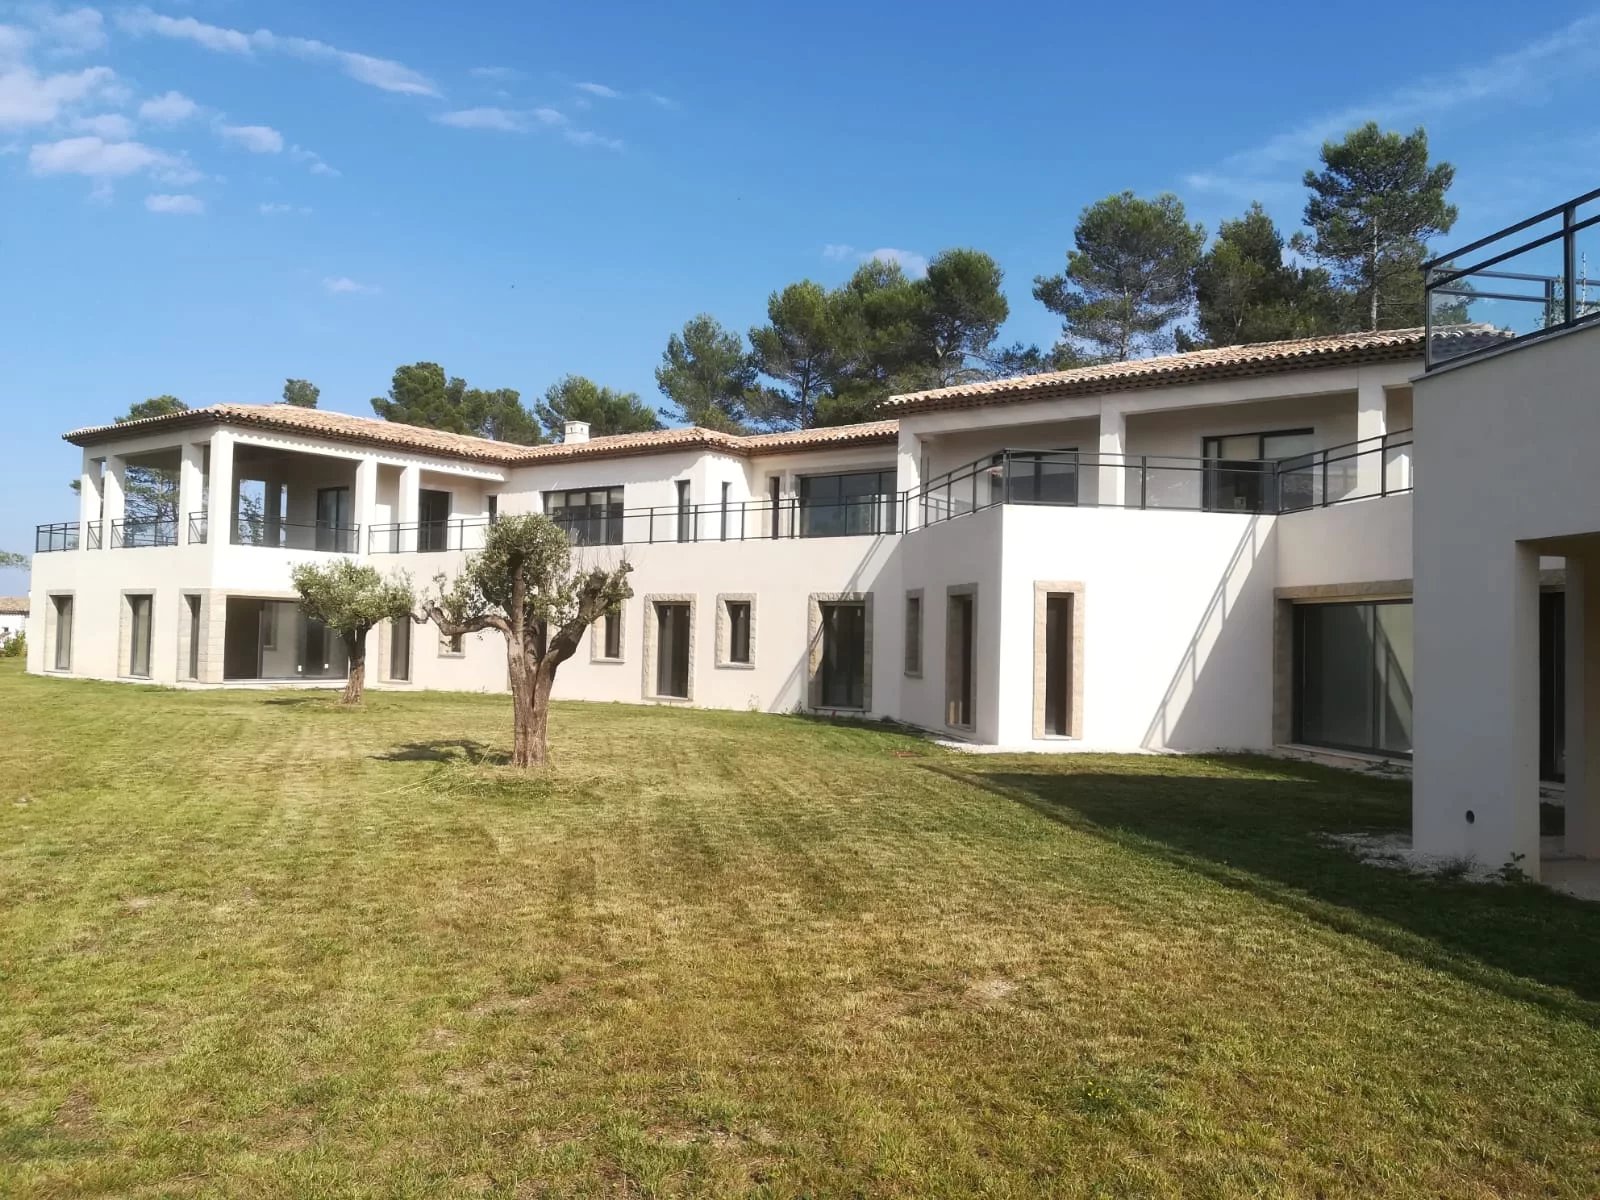 A Property to Develop as Your Own in Torrettes France